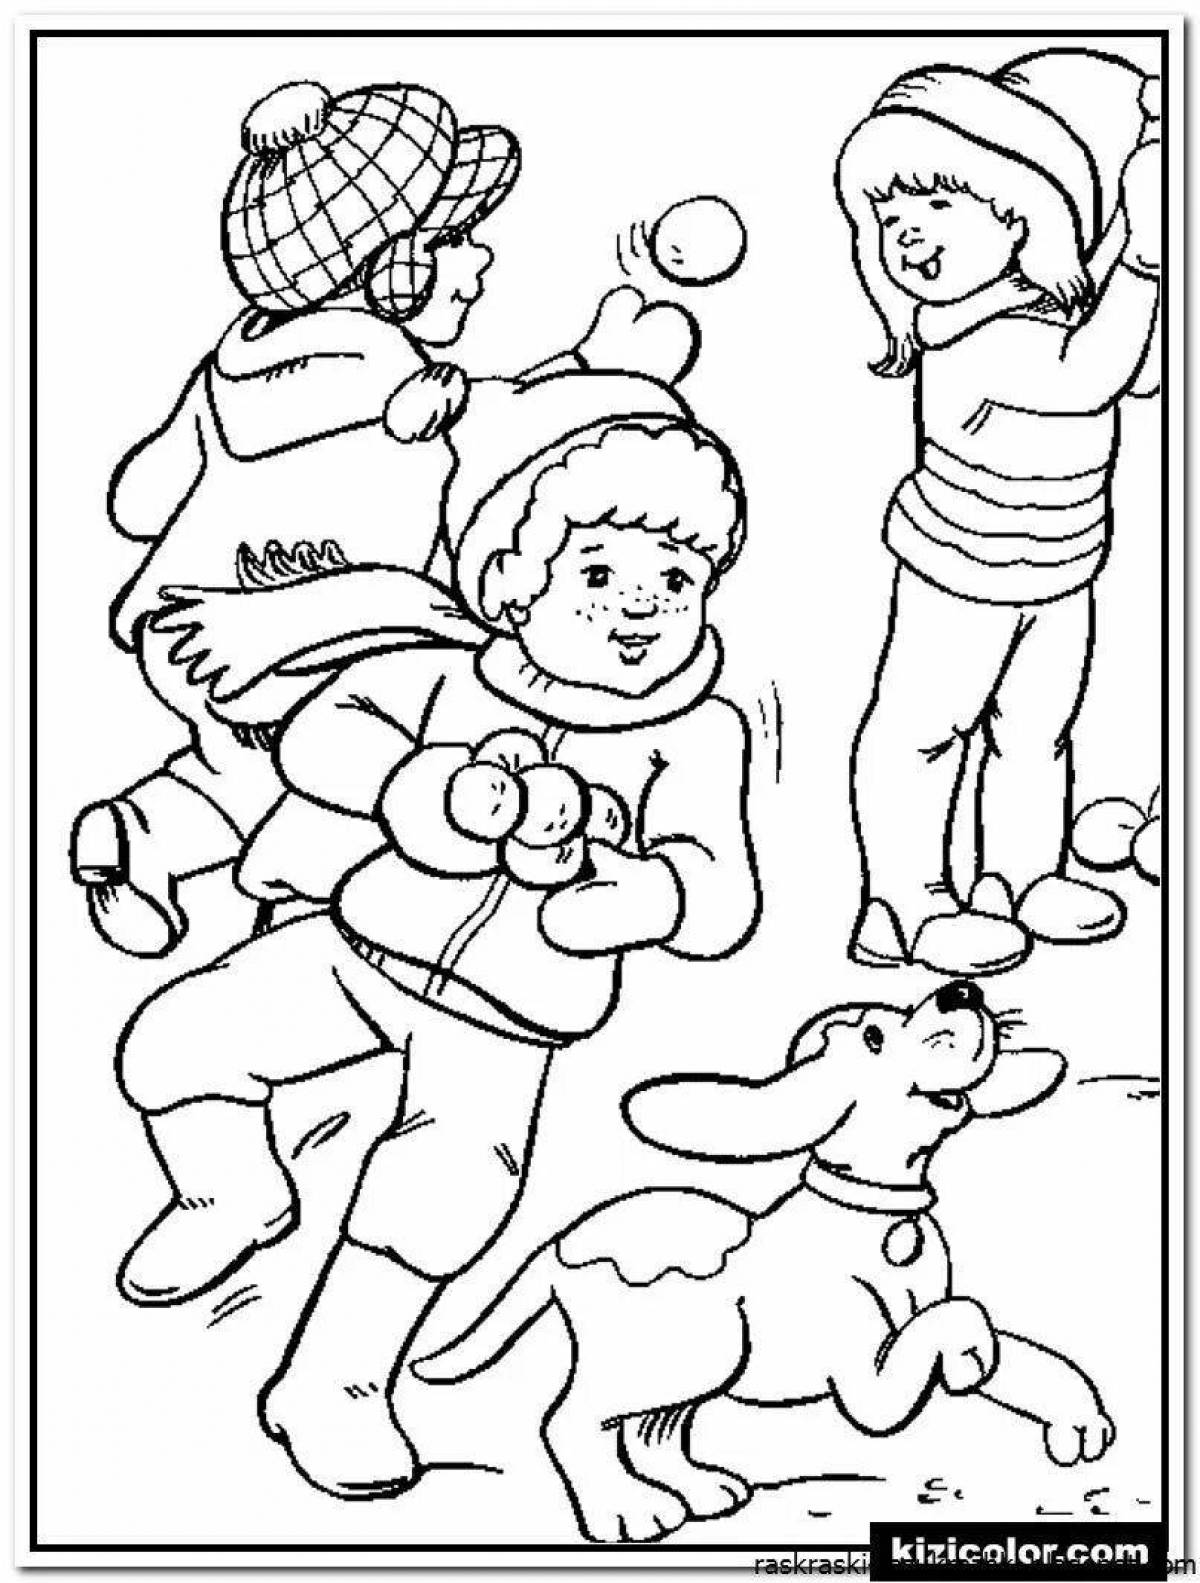 Coloring page playful children playing snowballs